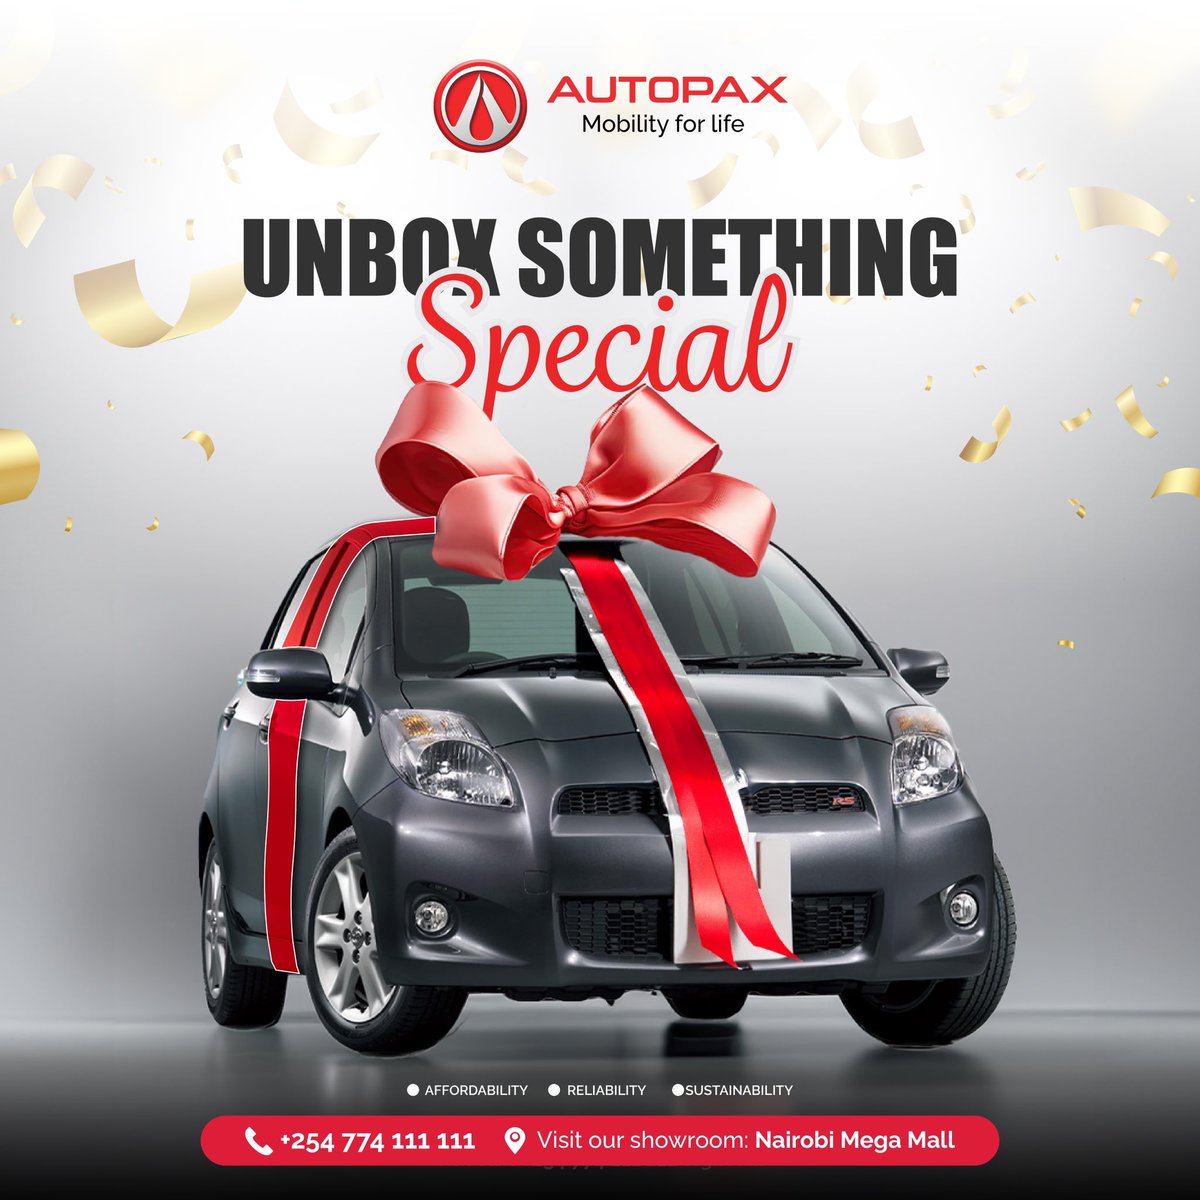 On Boxing Day 2023, unbox something special from Autopax! Visit our website today and find a perfect gift this festive season! 🎁

#holidaydeals #carsinkenya #christmasdeals